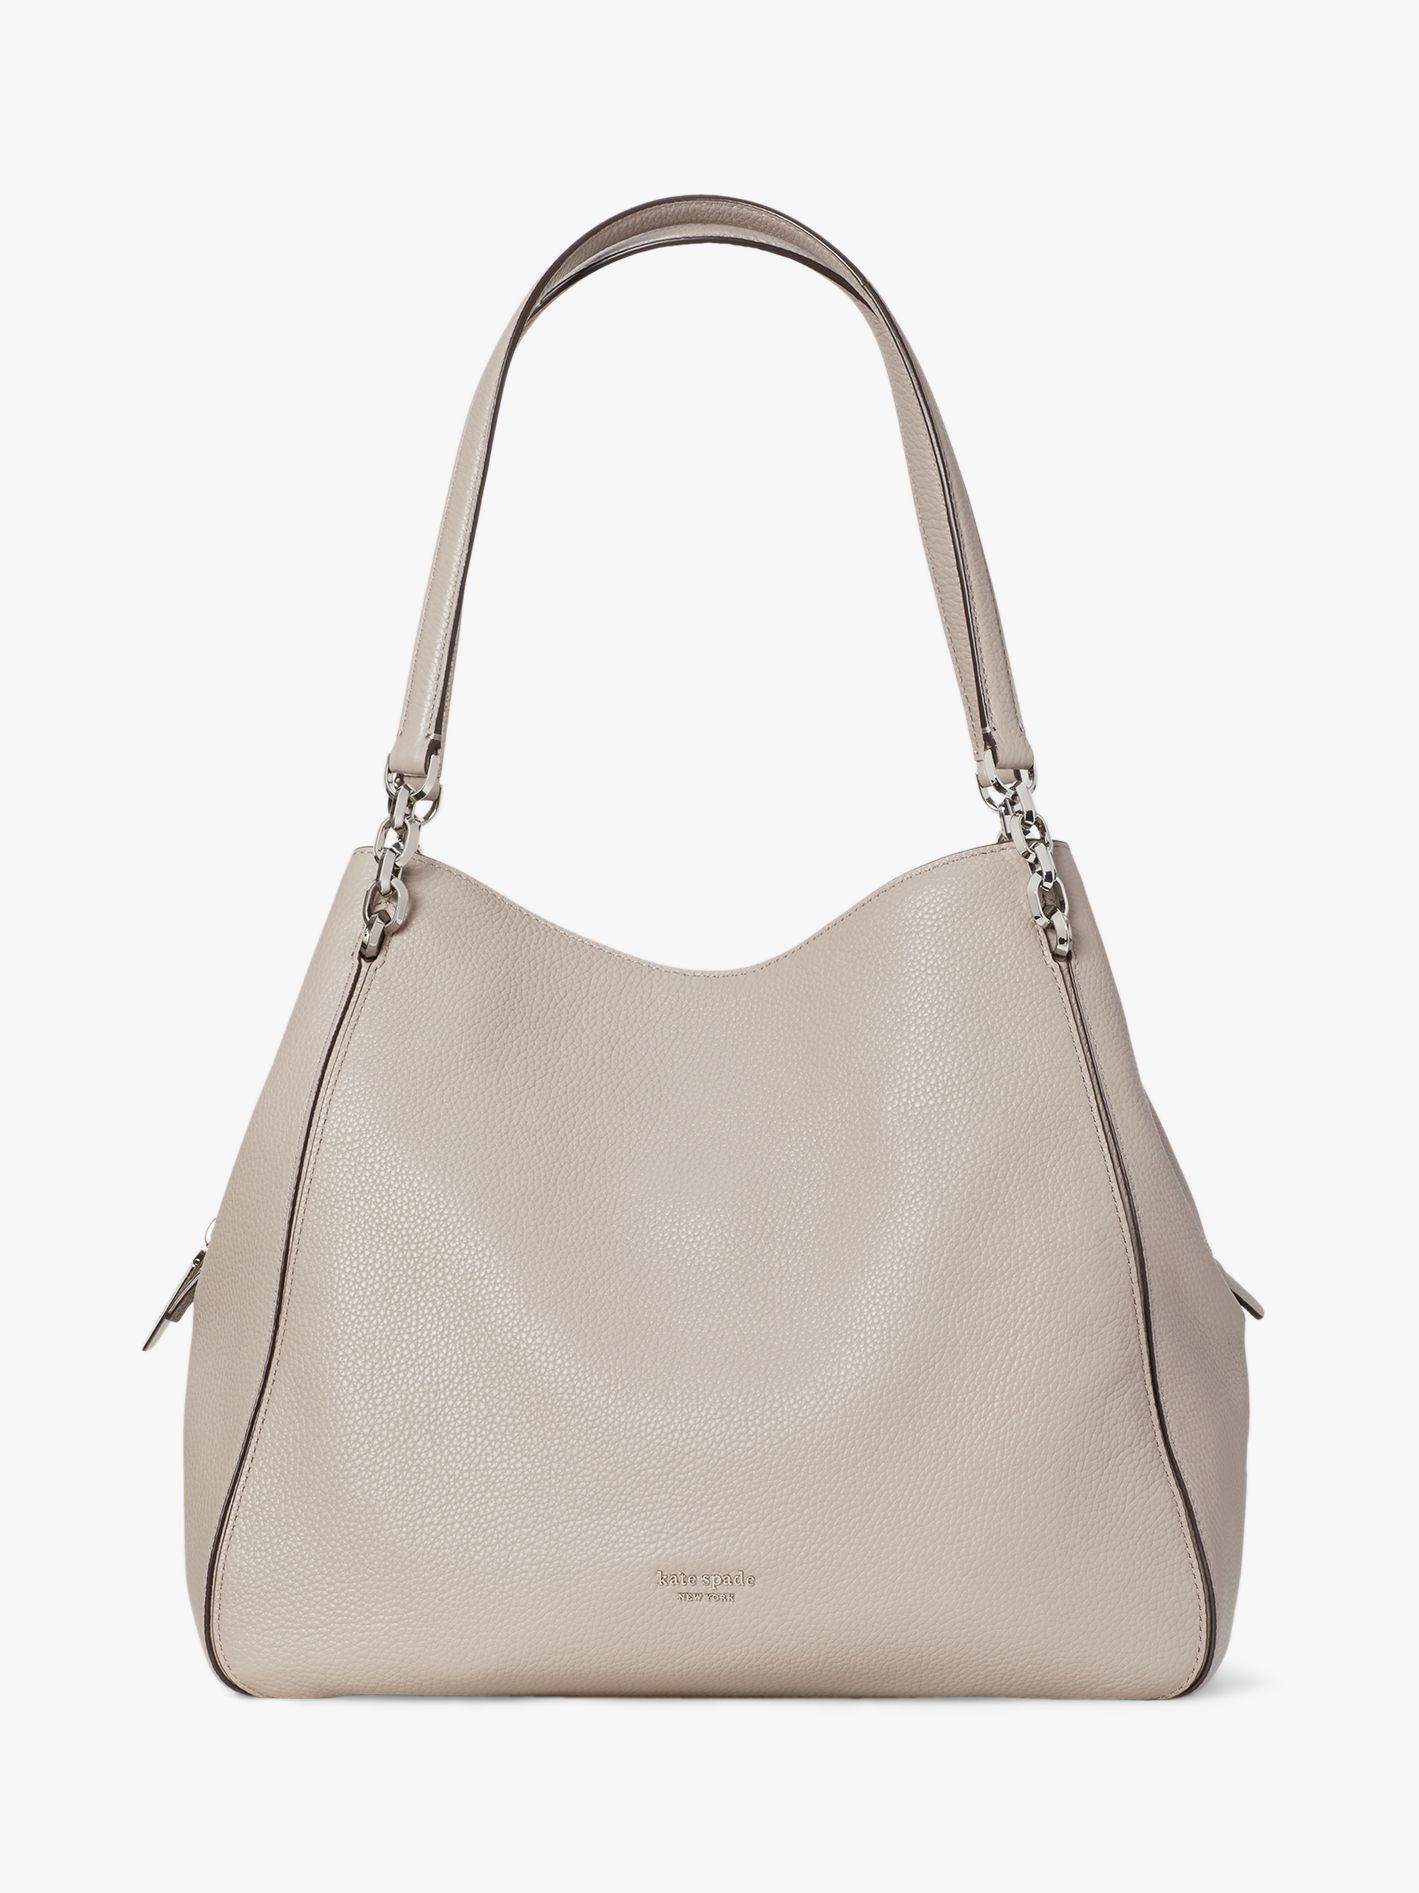 kate spade new york Hailey Large Leather Shoulder Bag, Warm Taupe